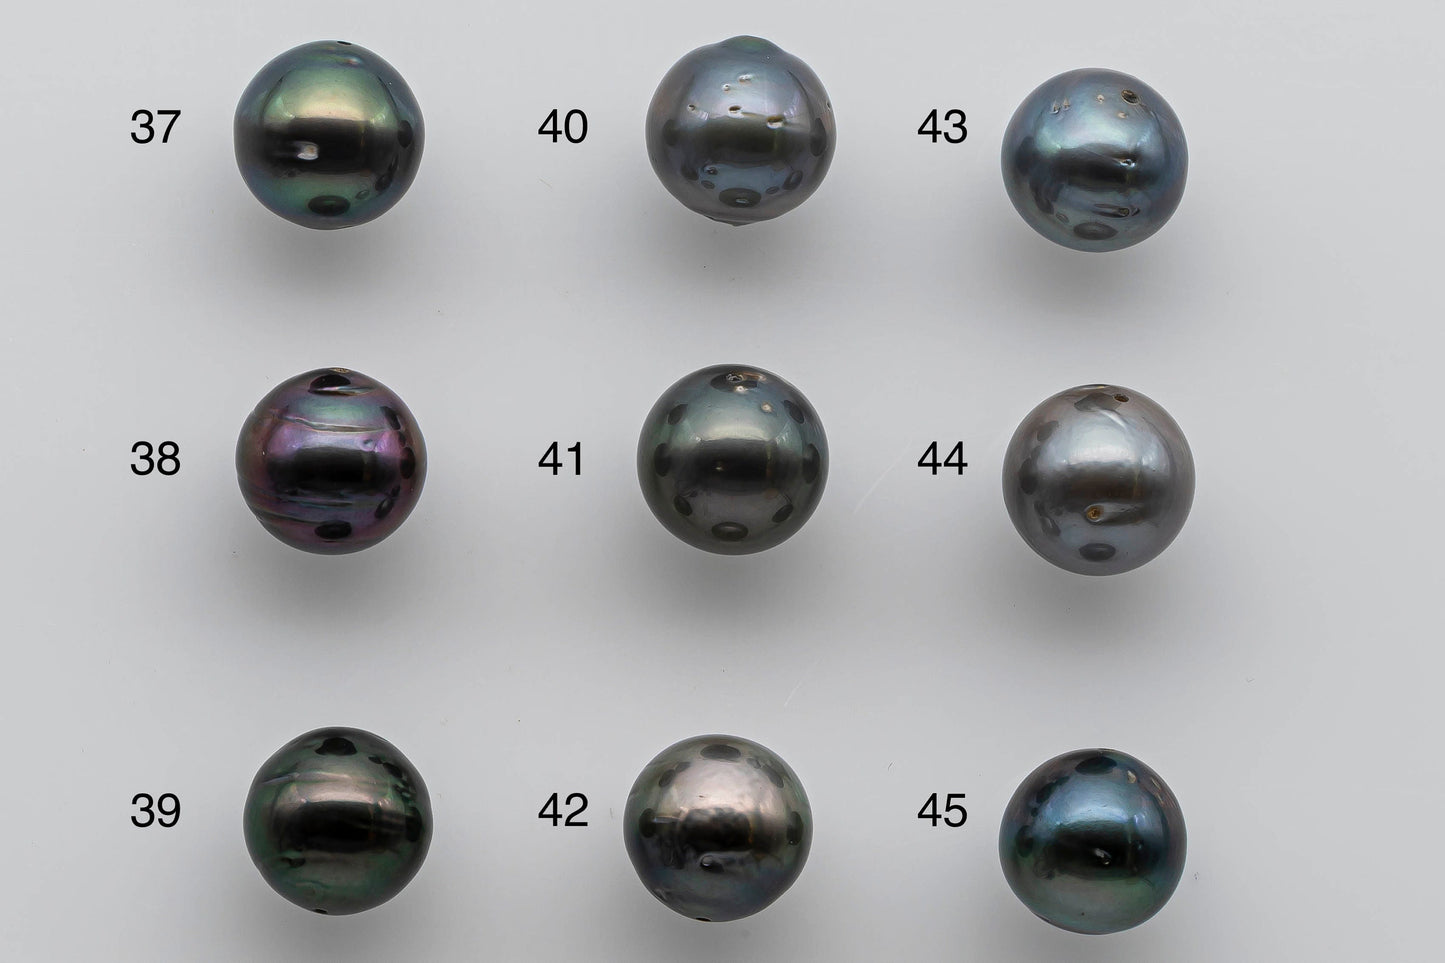 11-12mm Loose Tahitian Pearl Near Round with High Lusters and Natural Colors, Blemish and Predrilled Hole, SKU # 1397TH